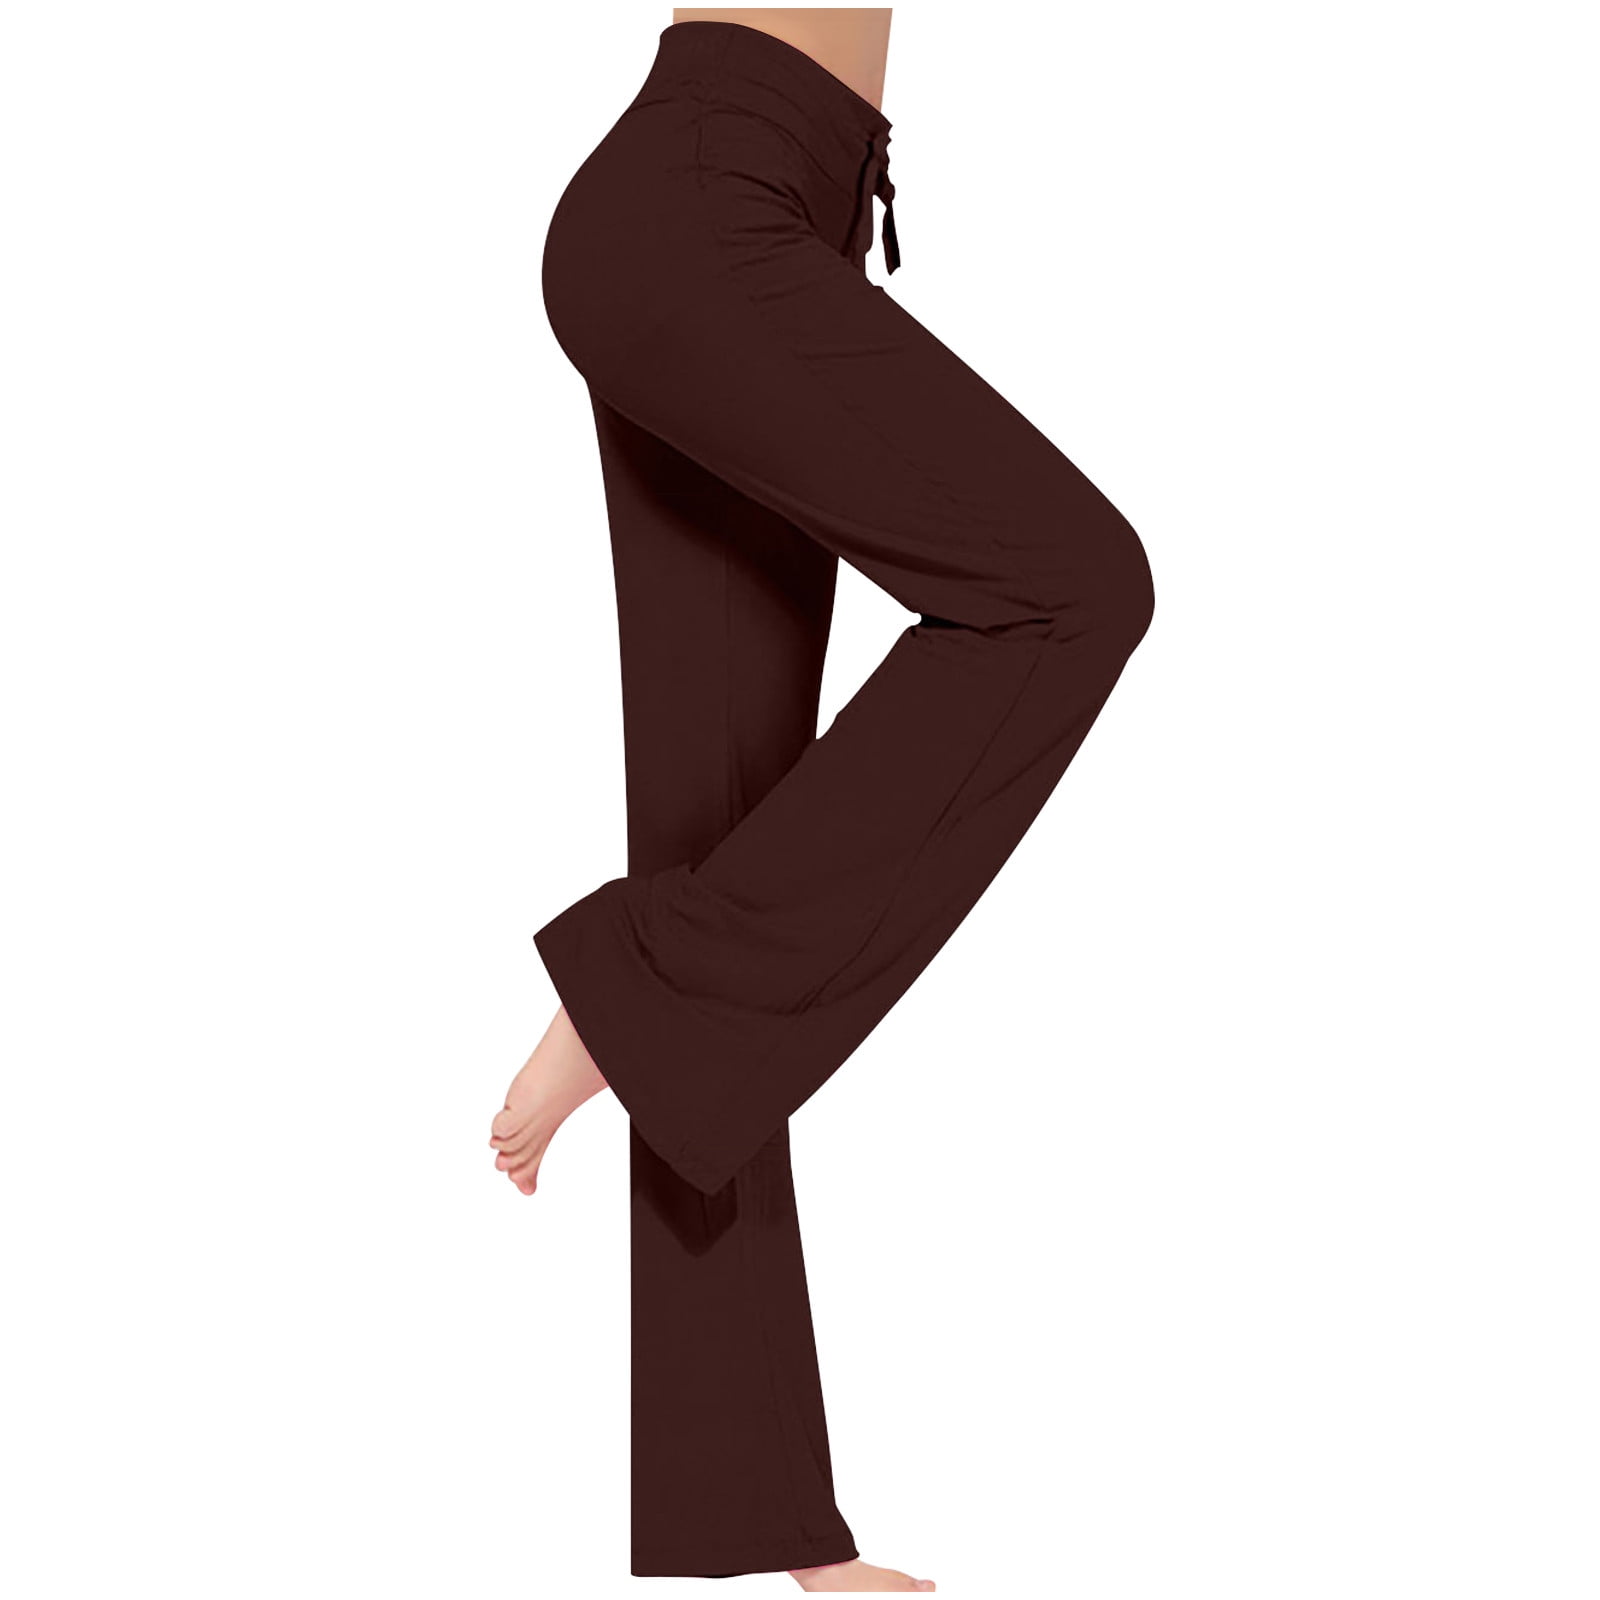 YUNAFFT Yoga Pants for Women Clearance Plus Size Women Ladies